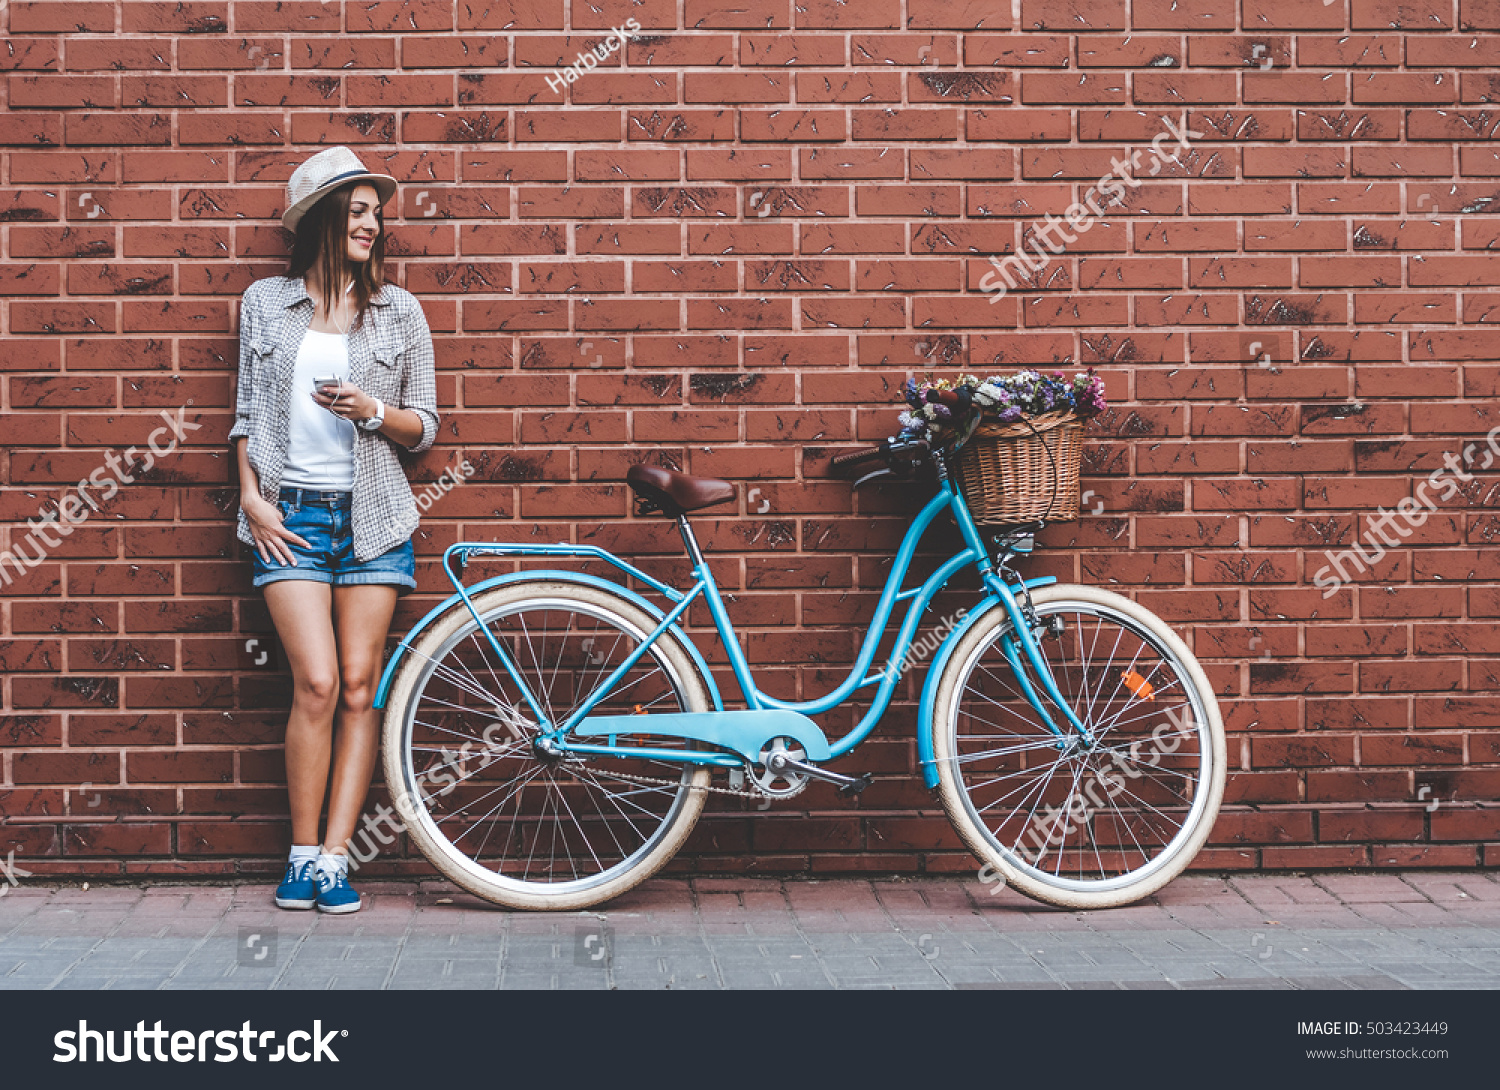 Beauty with vintage bike. Beautiful young smiling woman standing near her vintage bicycle with basket full of flowers while she leans against the wall. #503423449